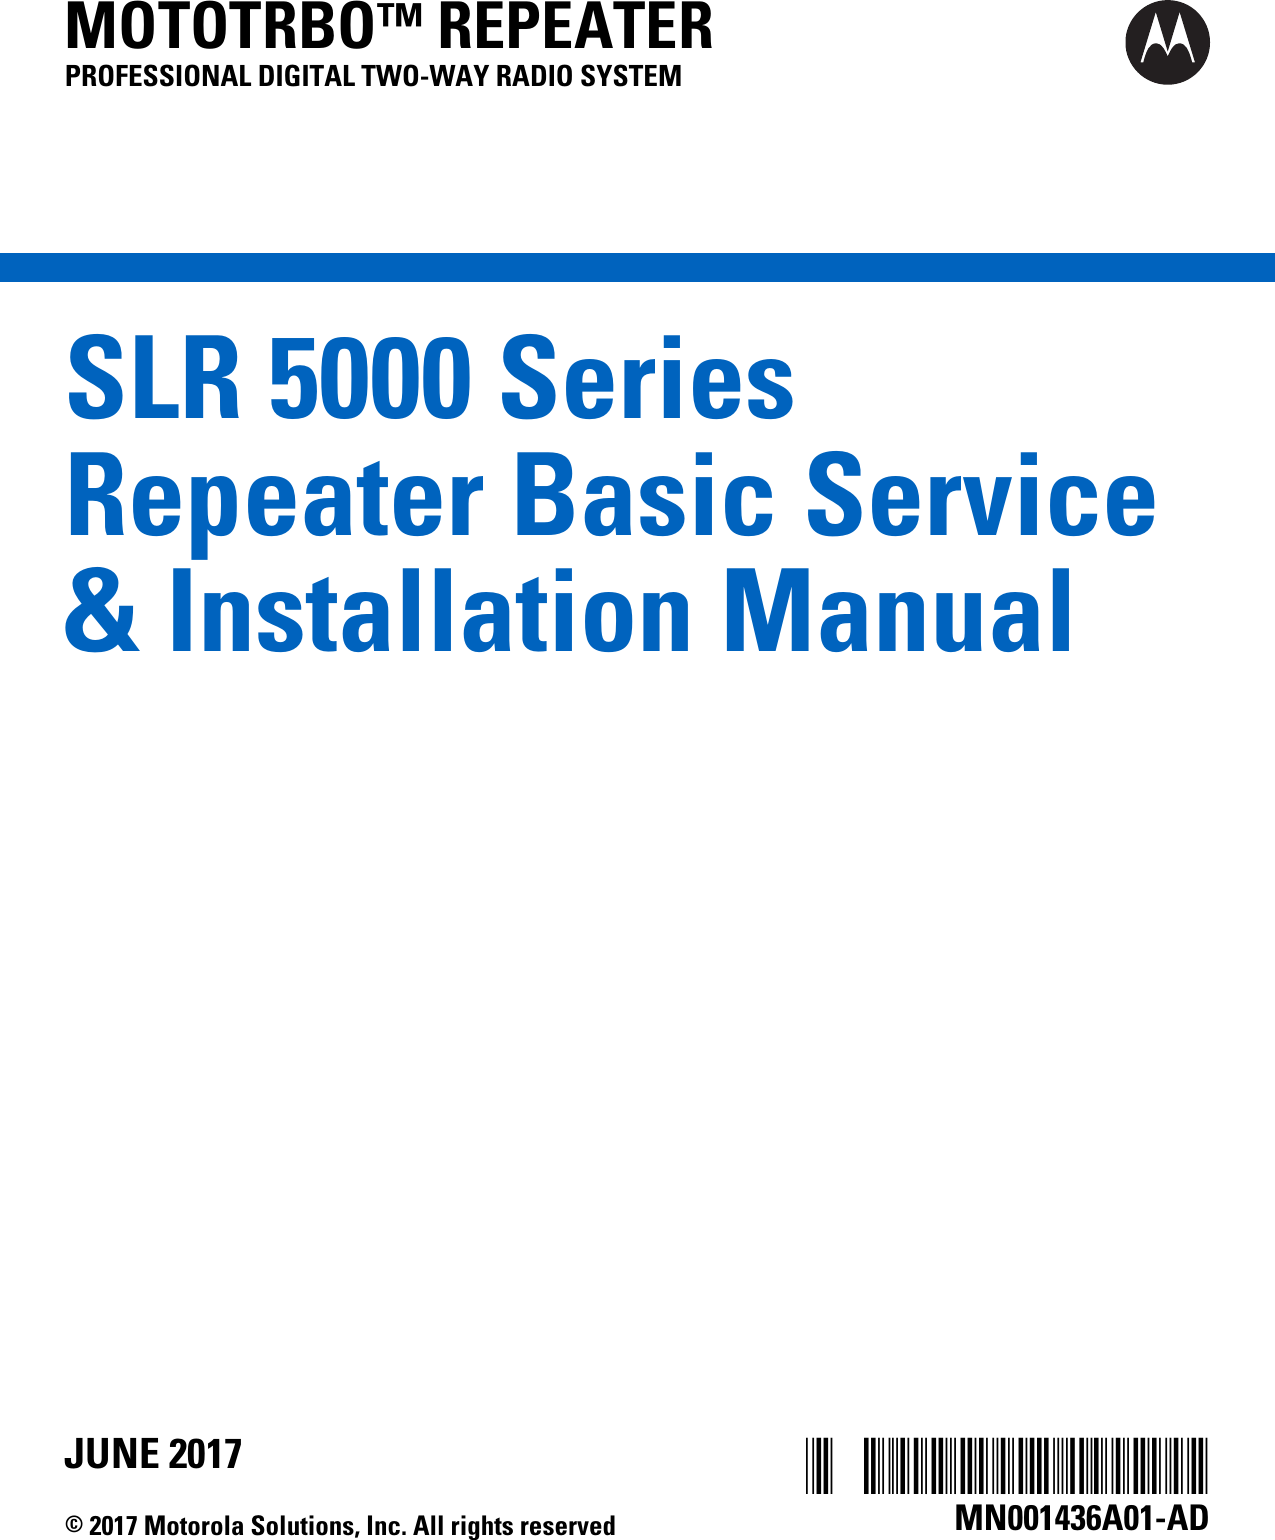 SLR 5000 SeriesRepeater Basic Service&amp; Installation ManualMOTOTRBO™ REPEATERPROFESSIONAL DIGITAL TWO-WAY RADIO SYSTEM* MN001436A01*MN001436A01-ADJUNE 2017© 2017 Motorola Solutions, Inc. All rights reserved